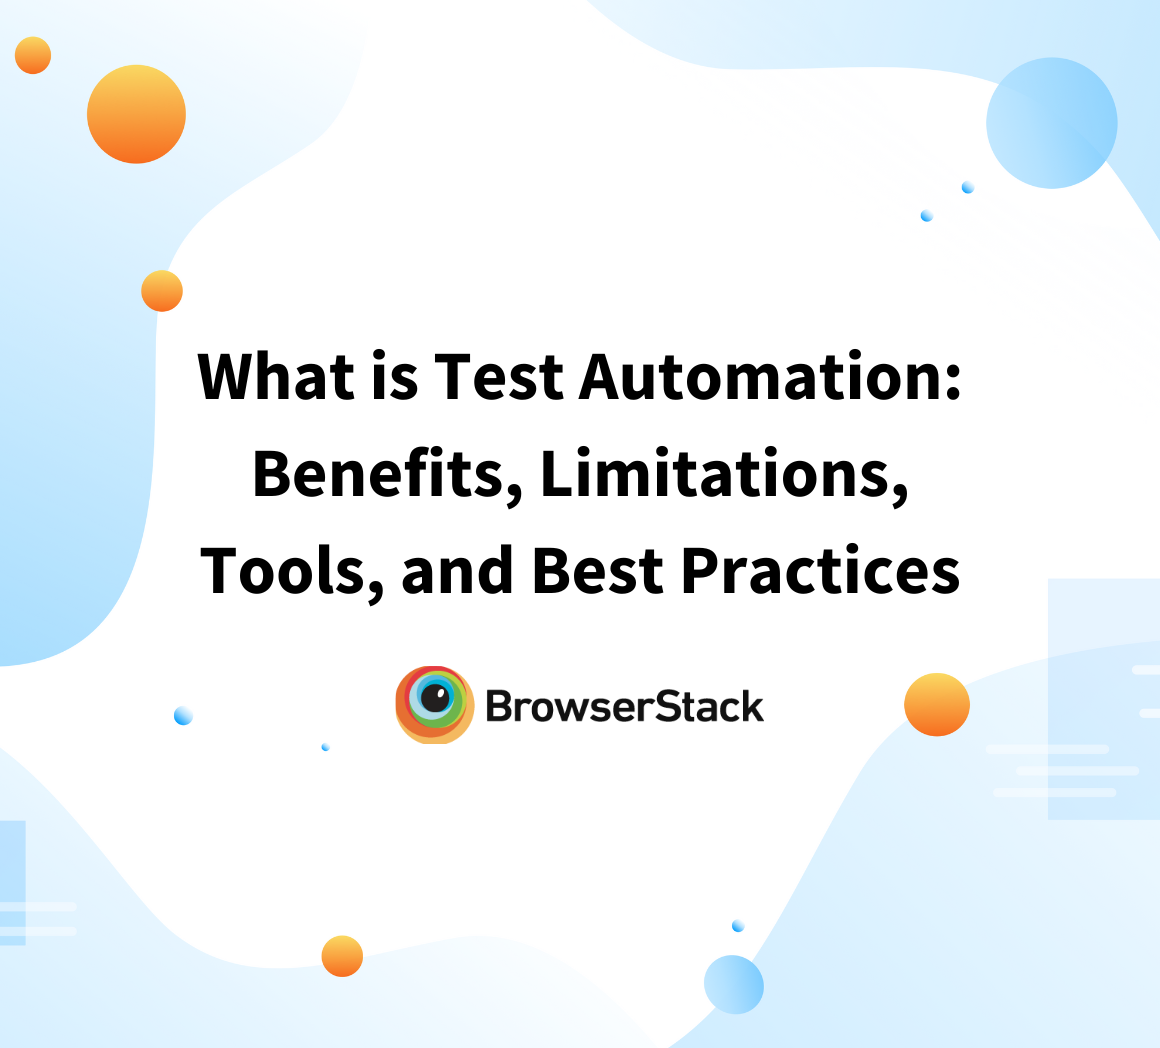 What is Test Automation Benefits, Limitations, Tools, and Best Practices